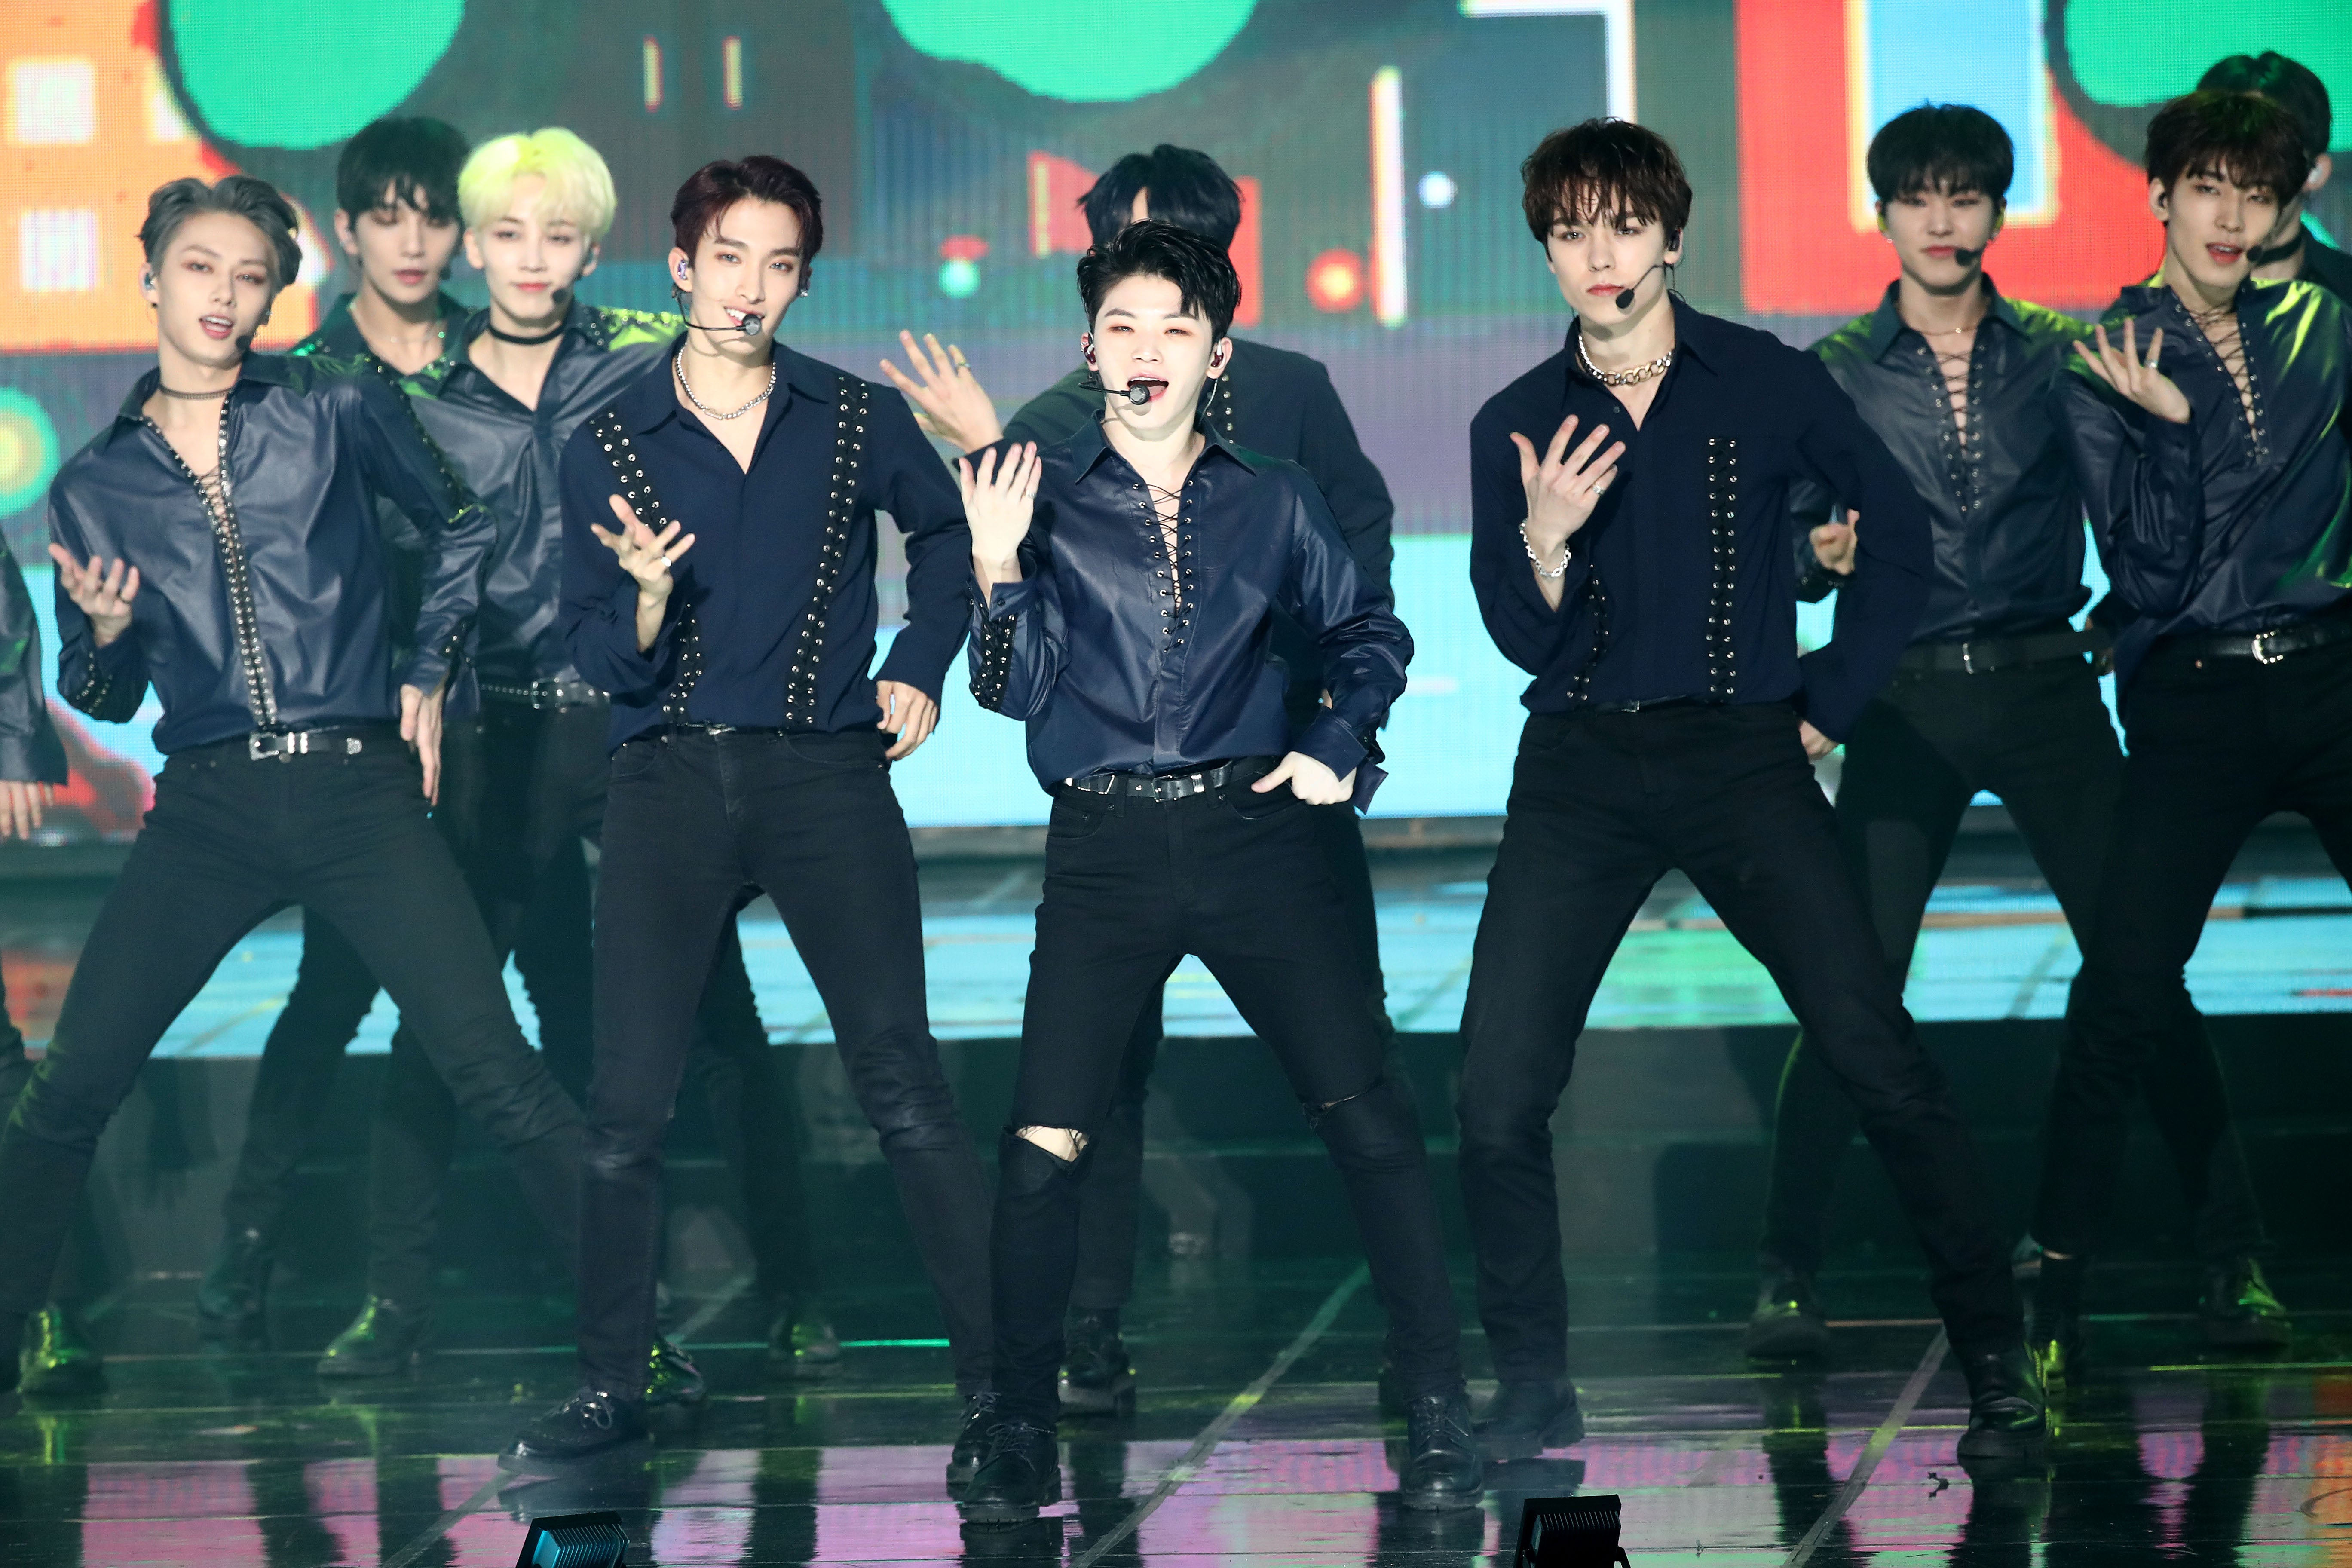 SEVENTEEN perform on stage during the 8th Gaon Chart K-Pop Awards on 23 January, 2019 in Seoul, South Korea